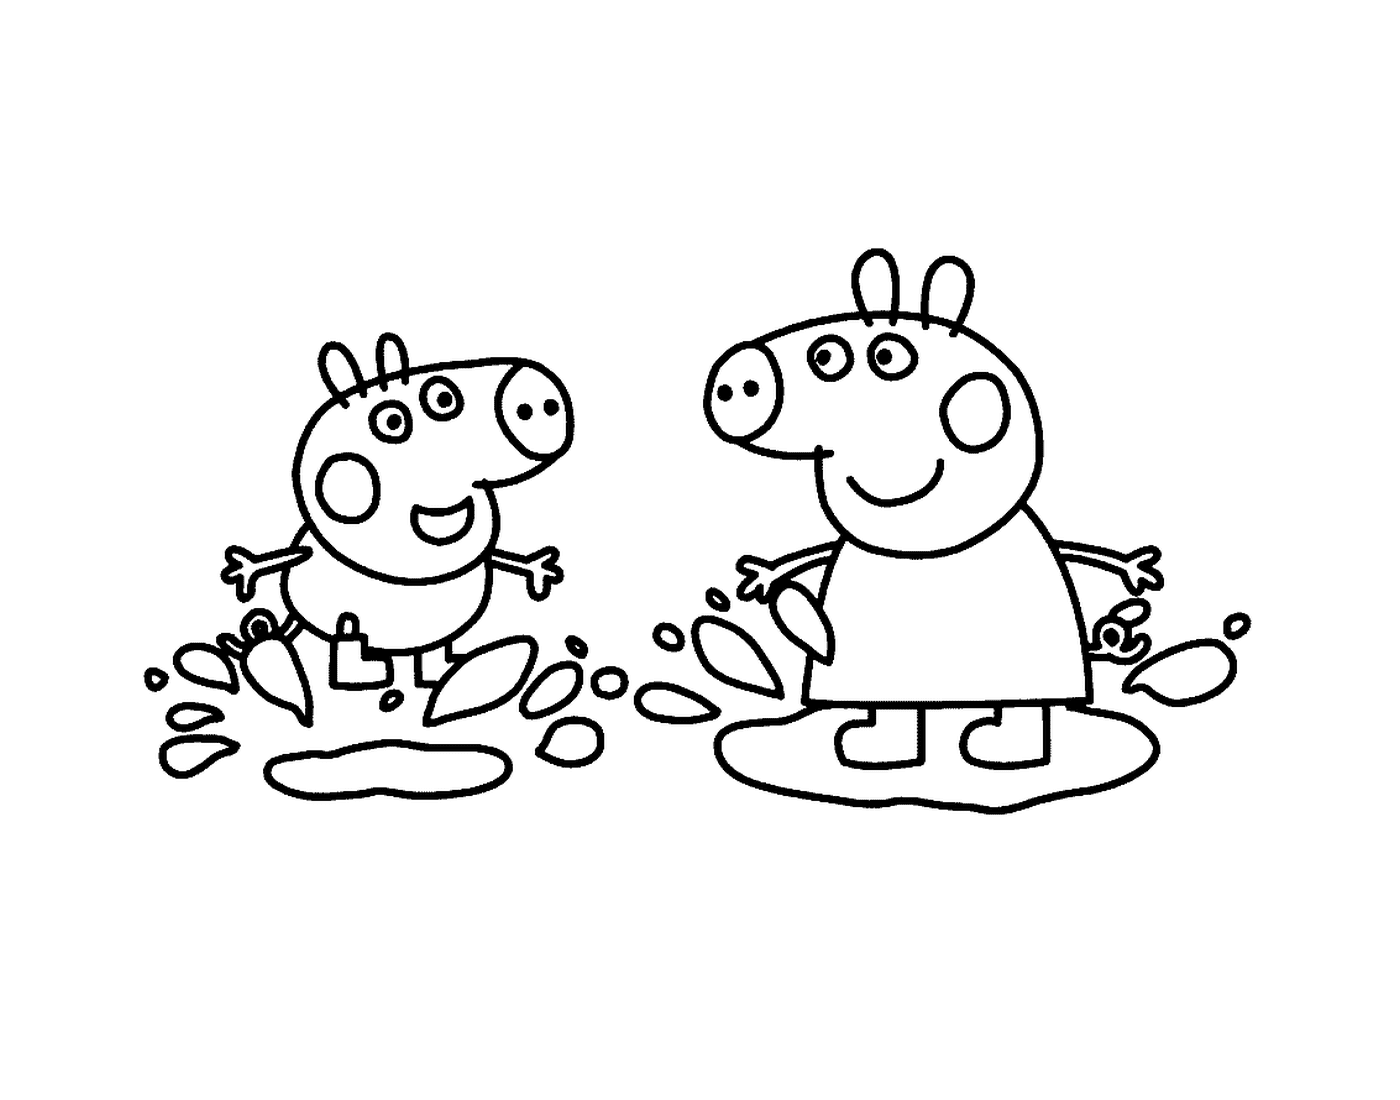  A couple of Peppa Pig characters side by side 